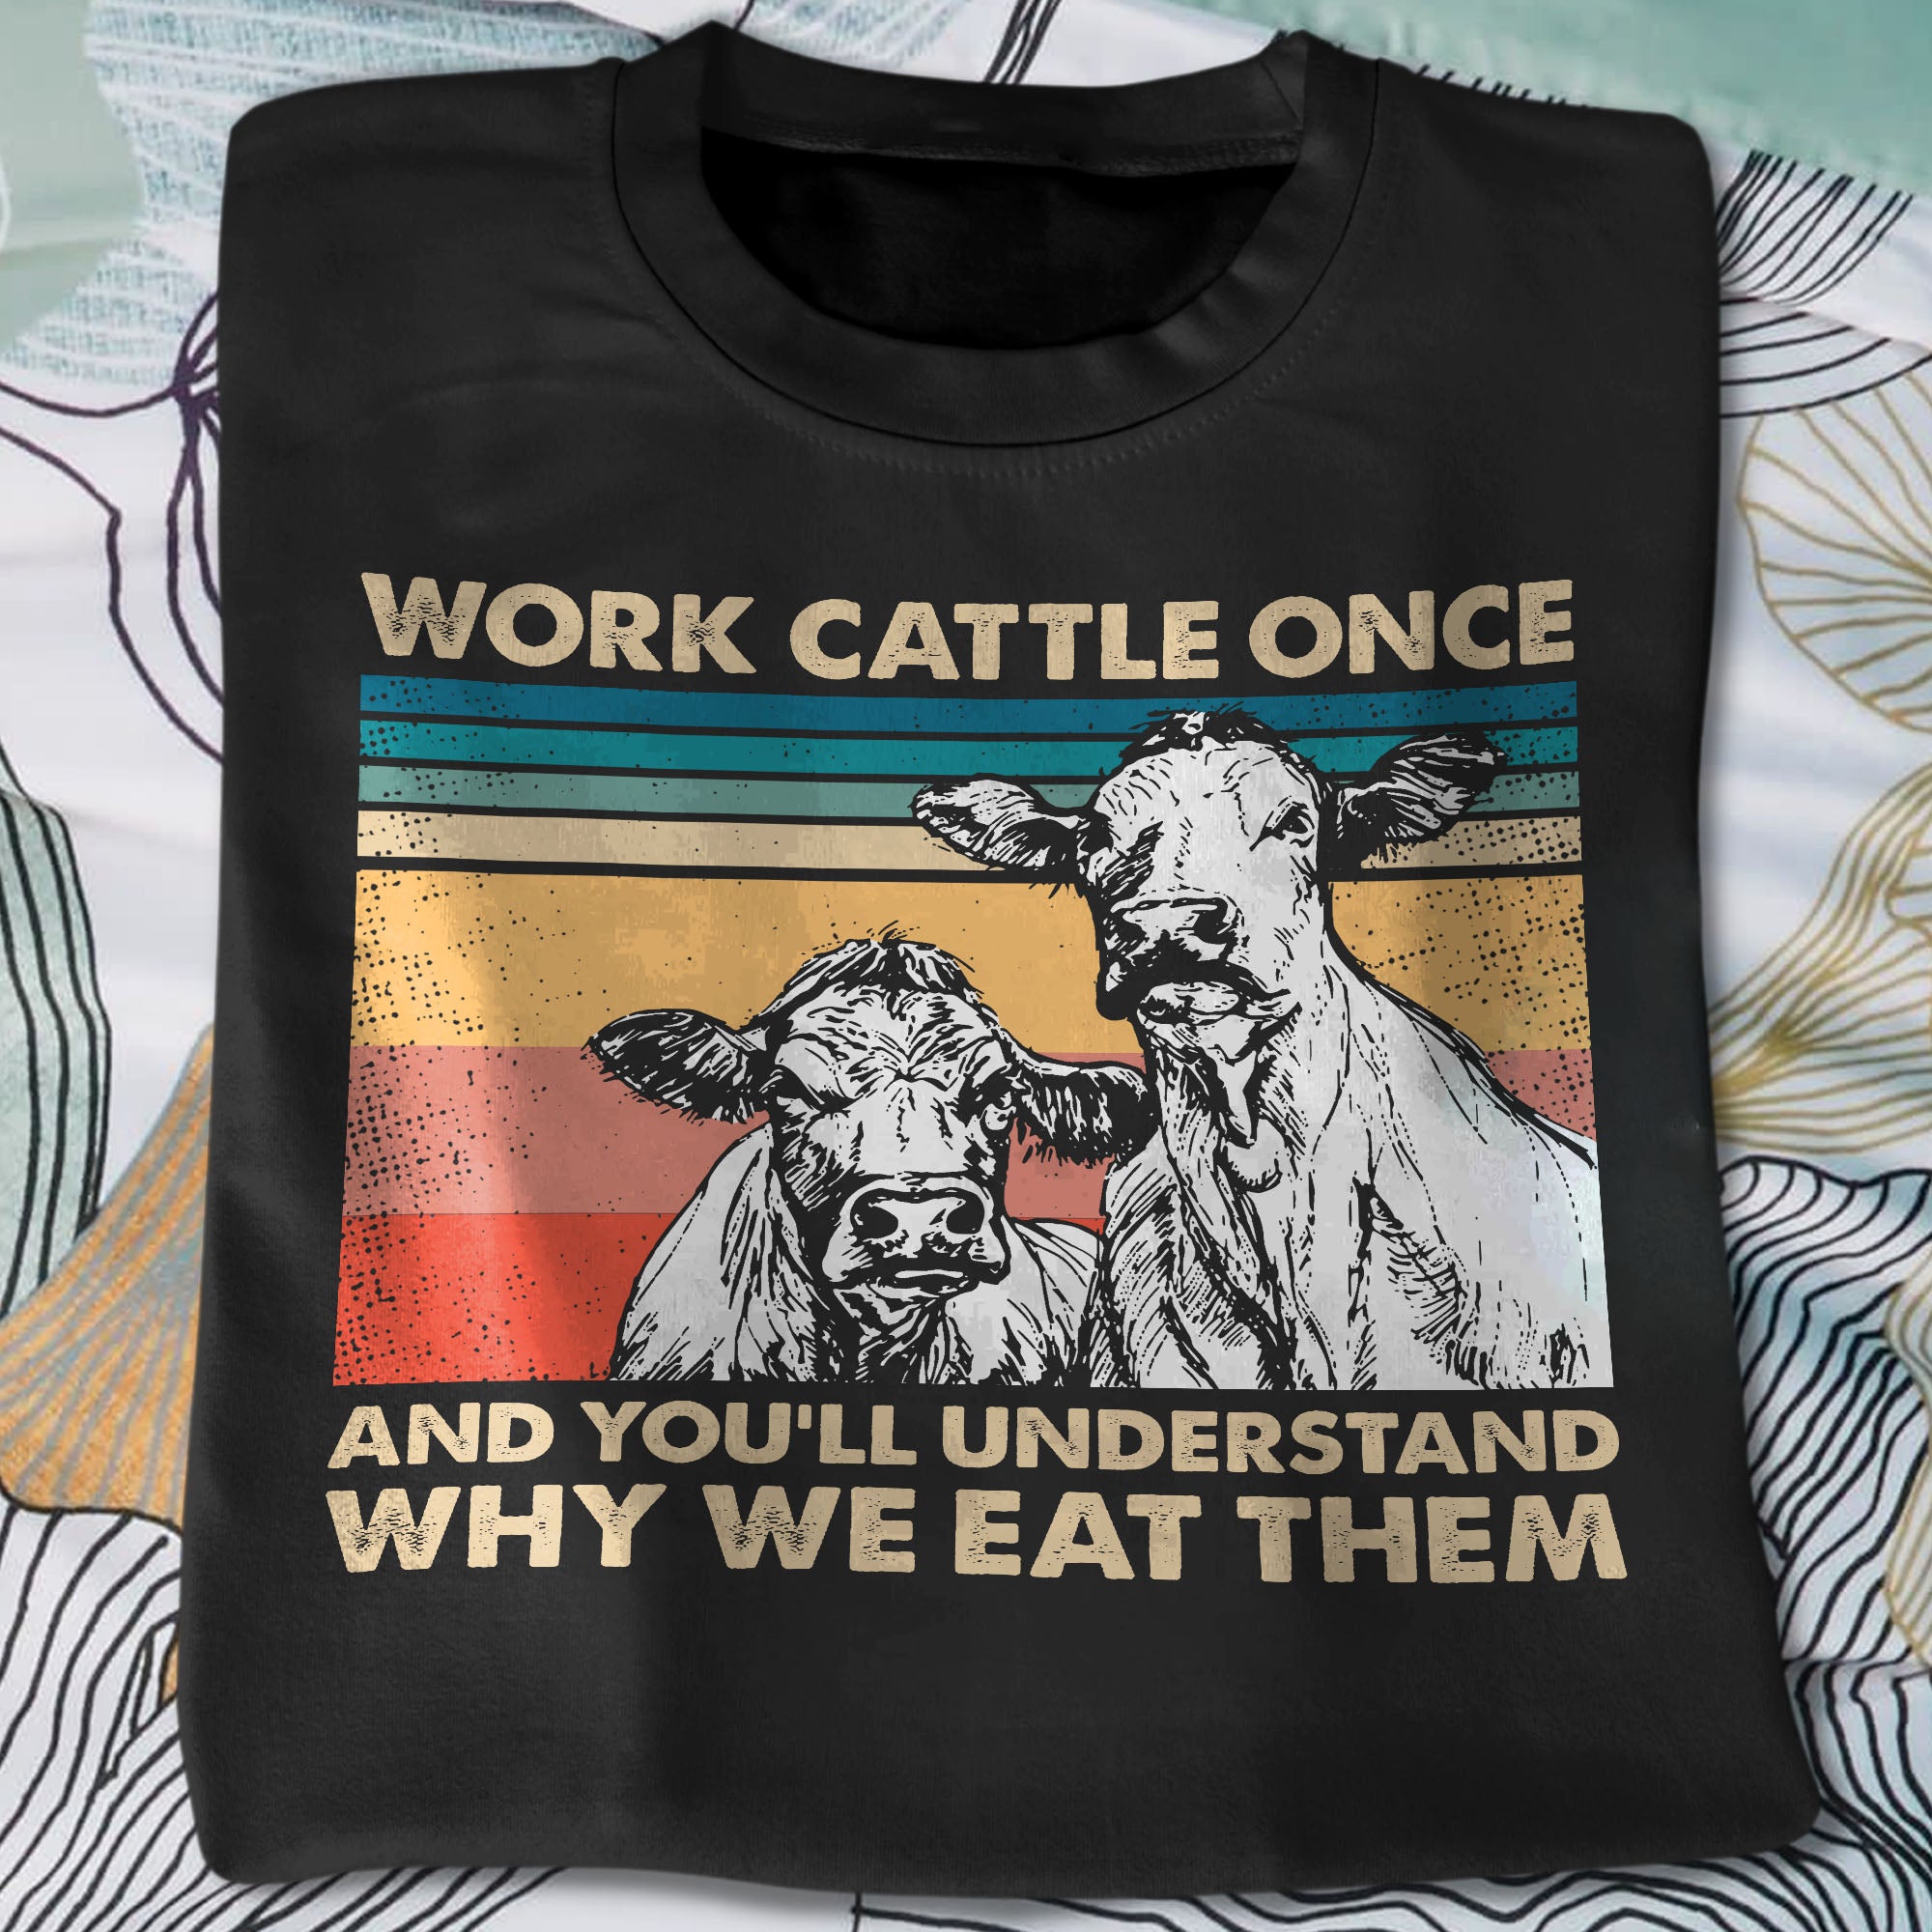 Retro Farm Cow Work Cattle Once And You’ll Understand Why We Eat Them Graphic Unisex T Shirt, Sweatshirt, Hoodie Size S – 5XL